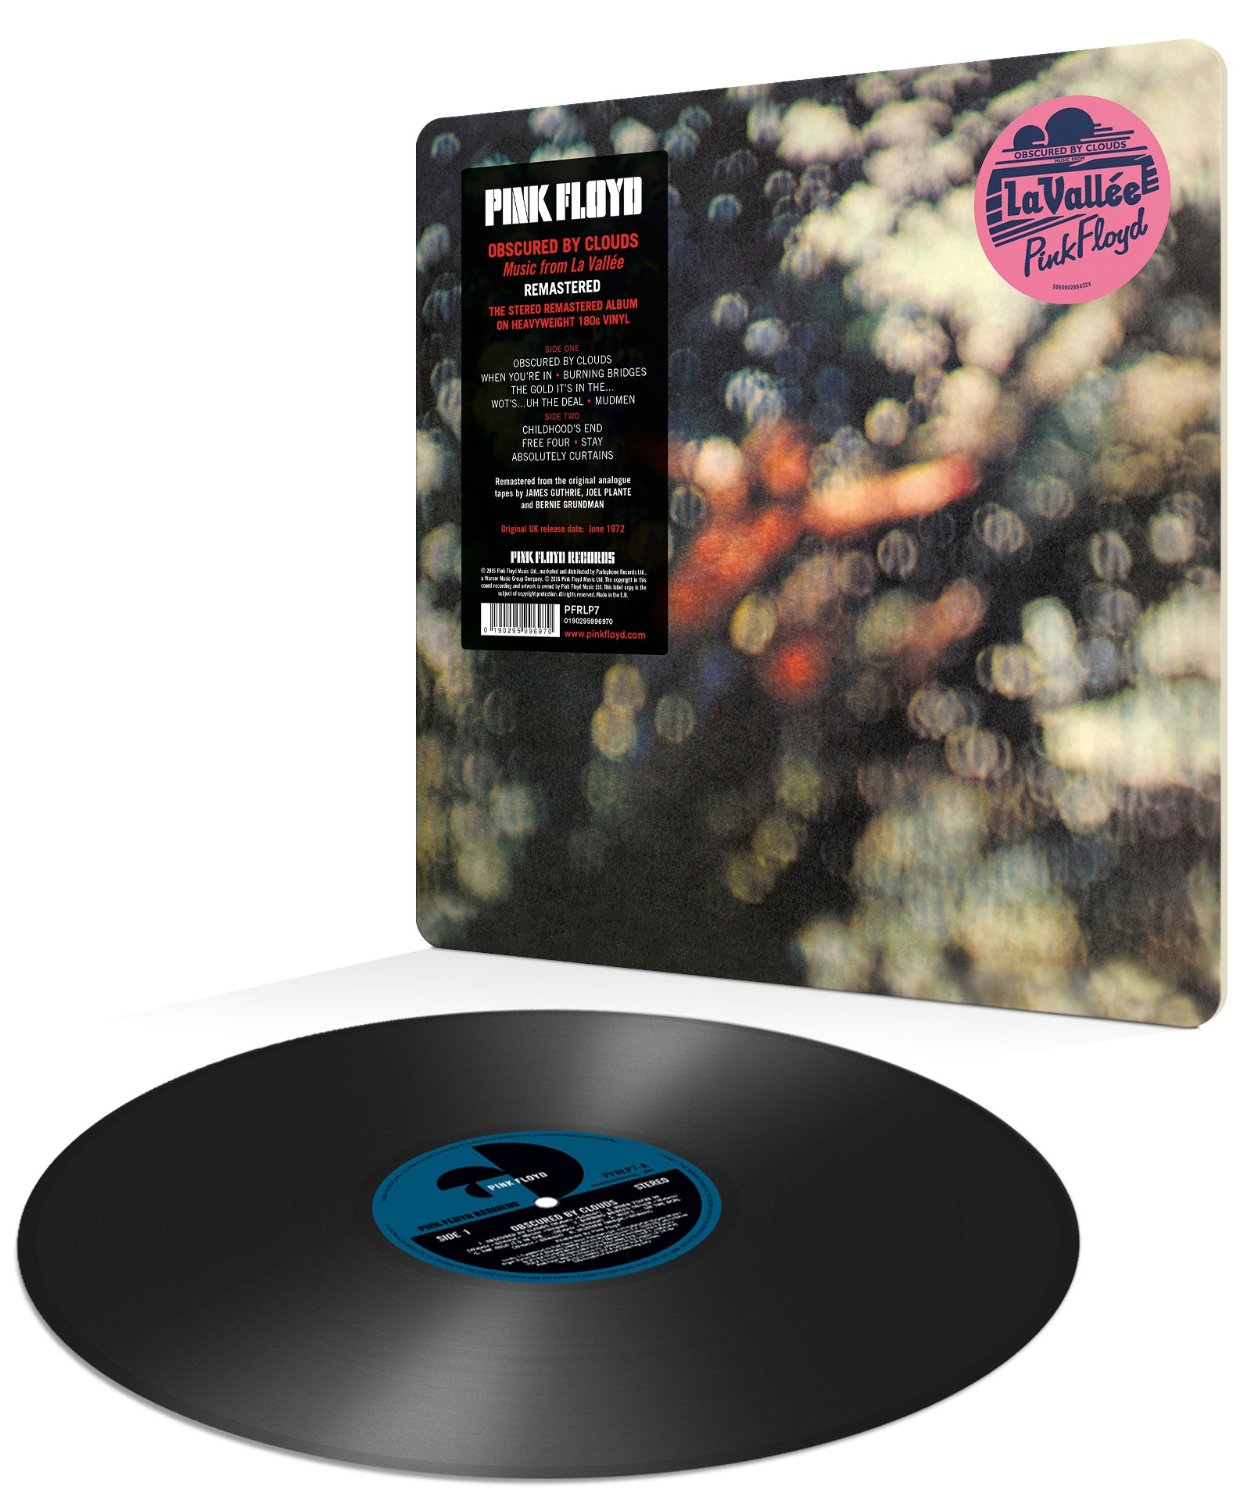 Pink Floyd "Obscured By Clouds" Vinyl